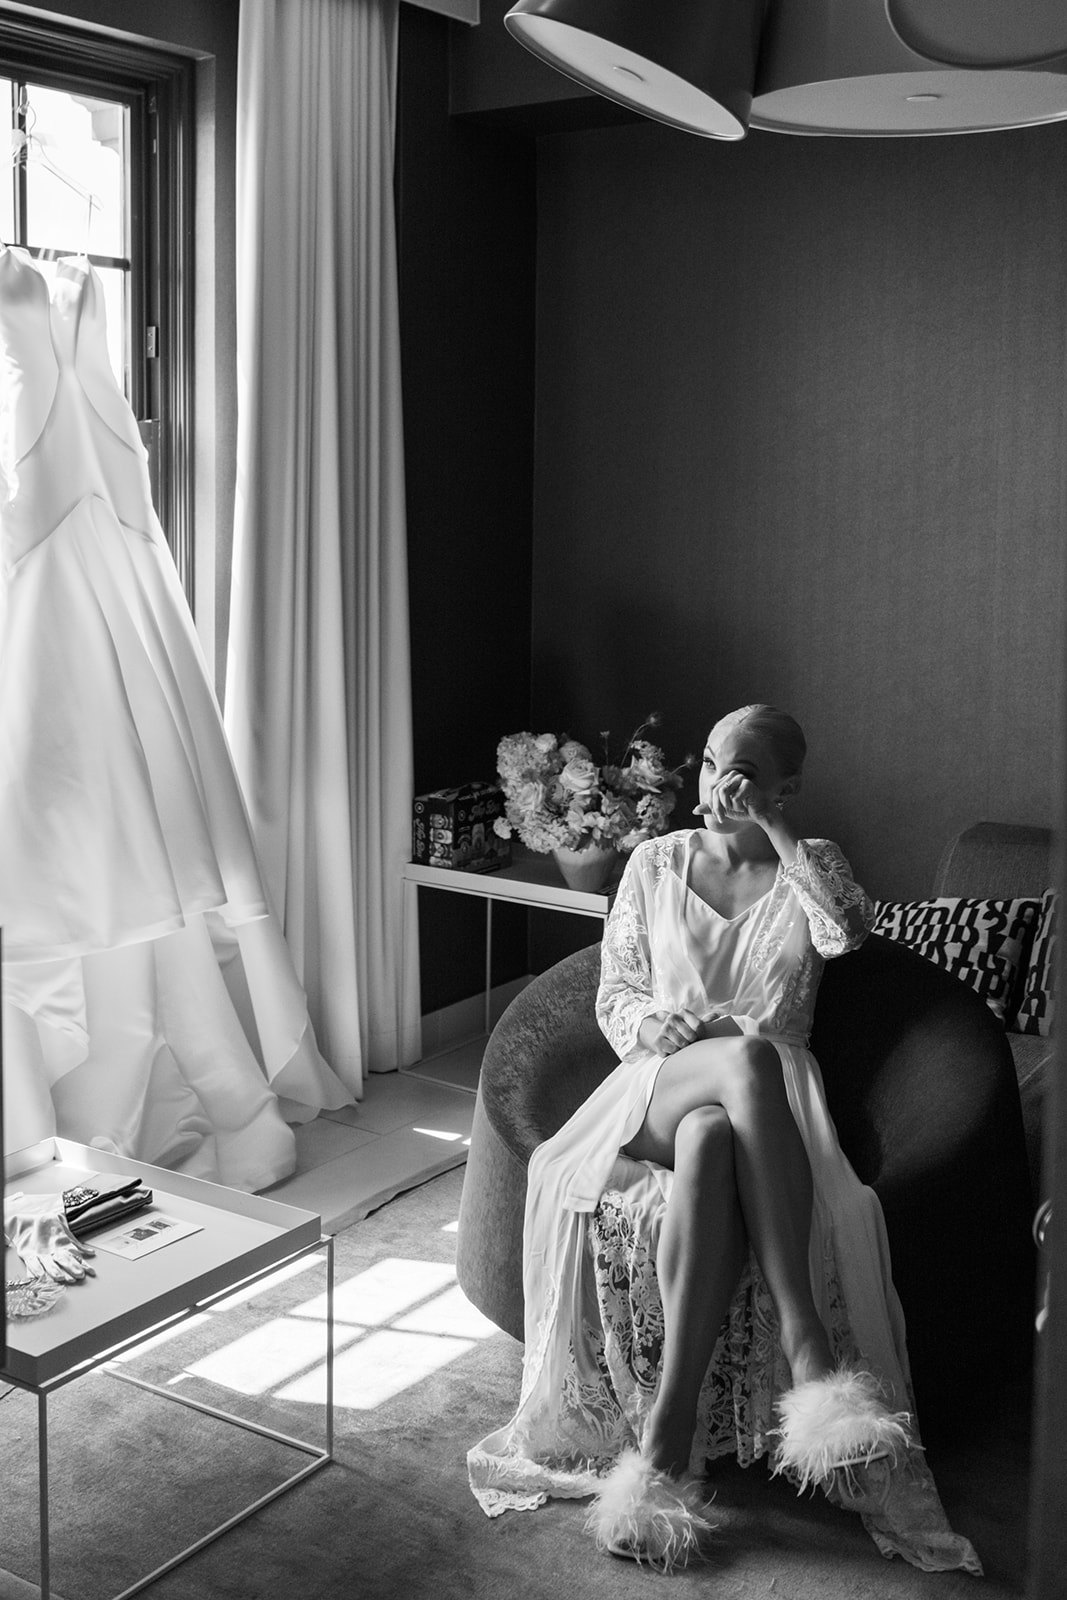 Bride reads a letter with her dress hanging in the window.